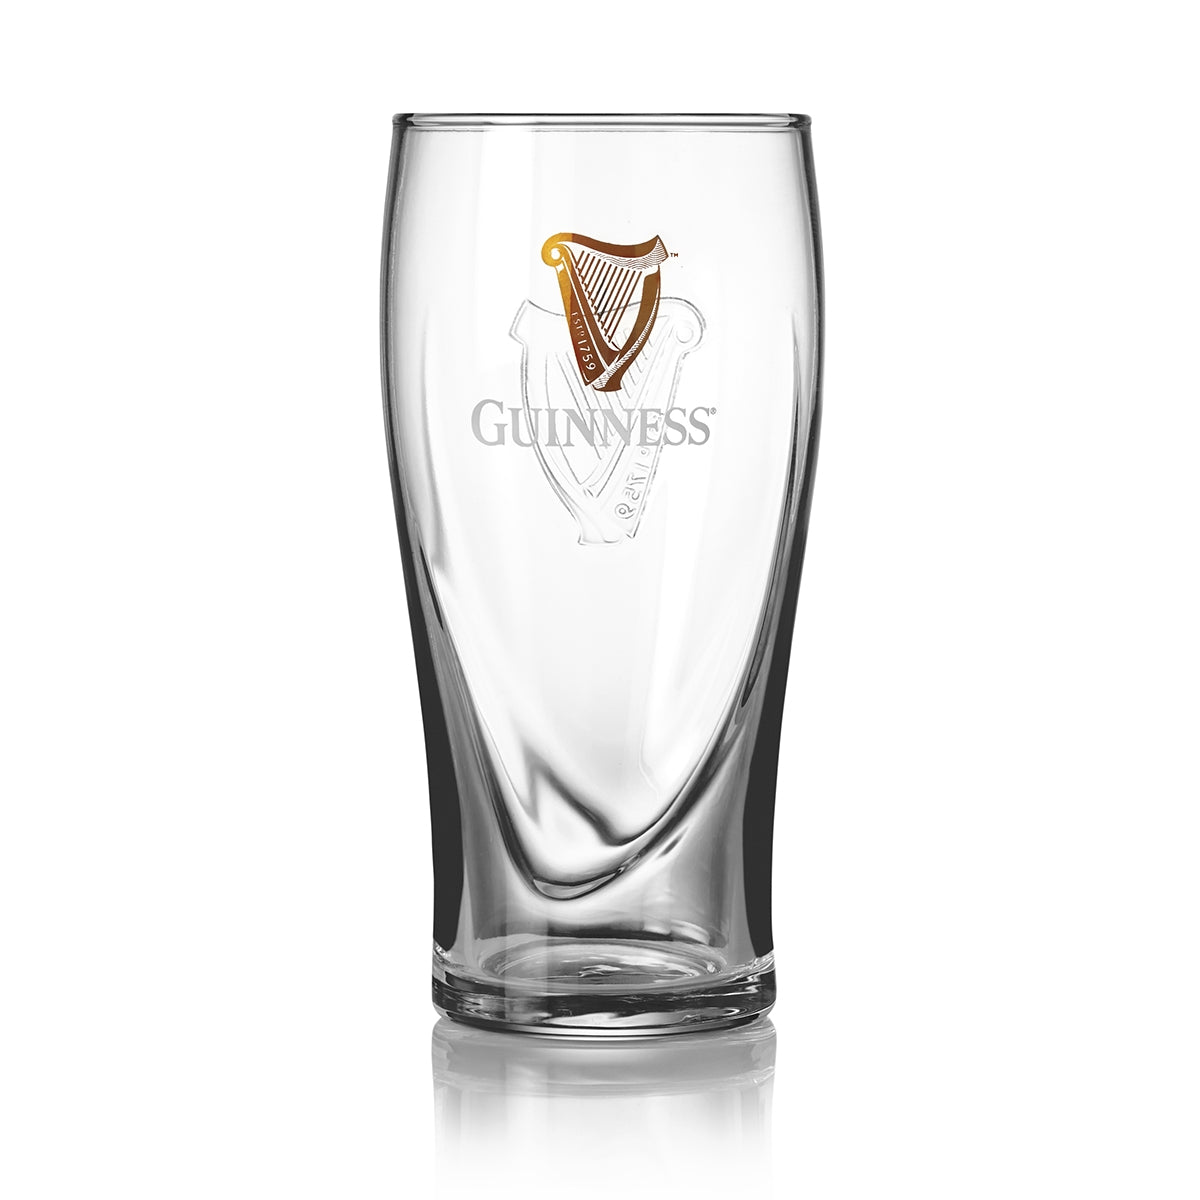 A Guinness UK pint glass + can on a white background.